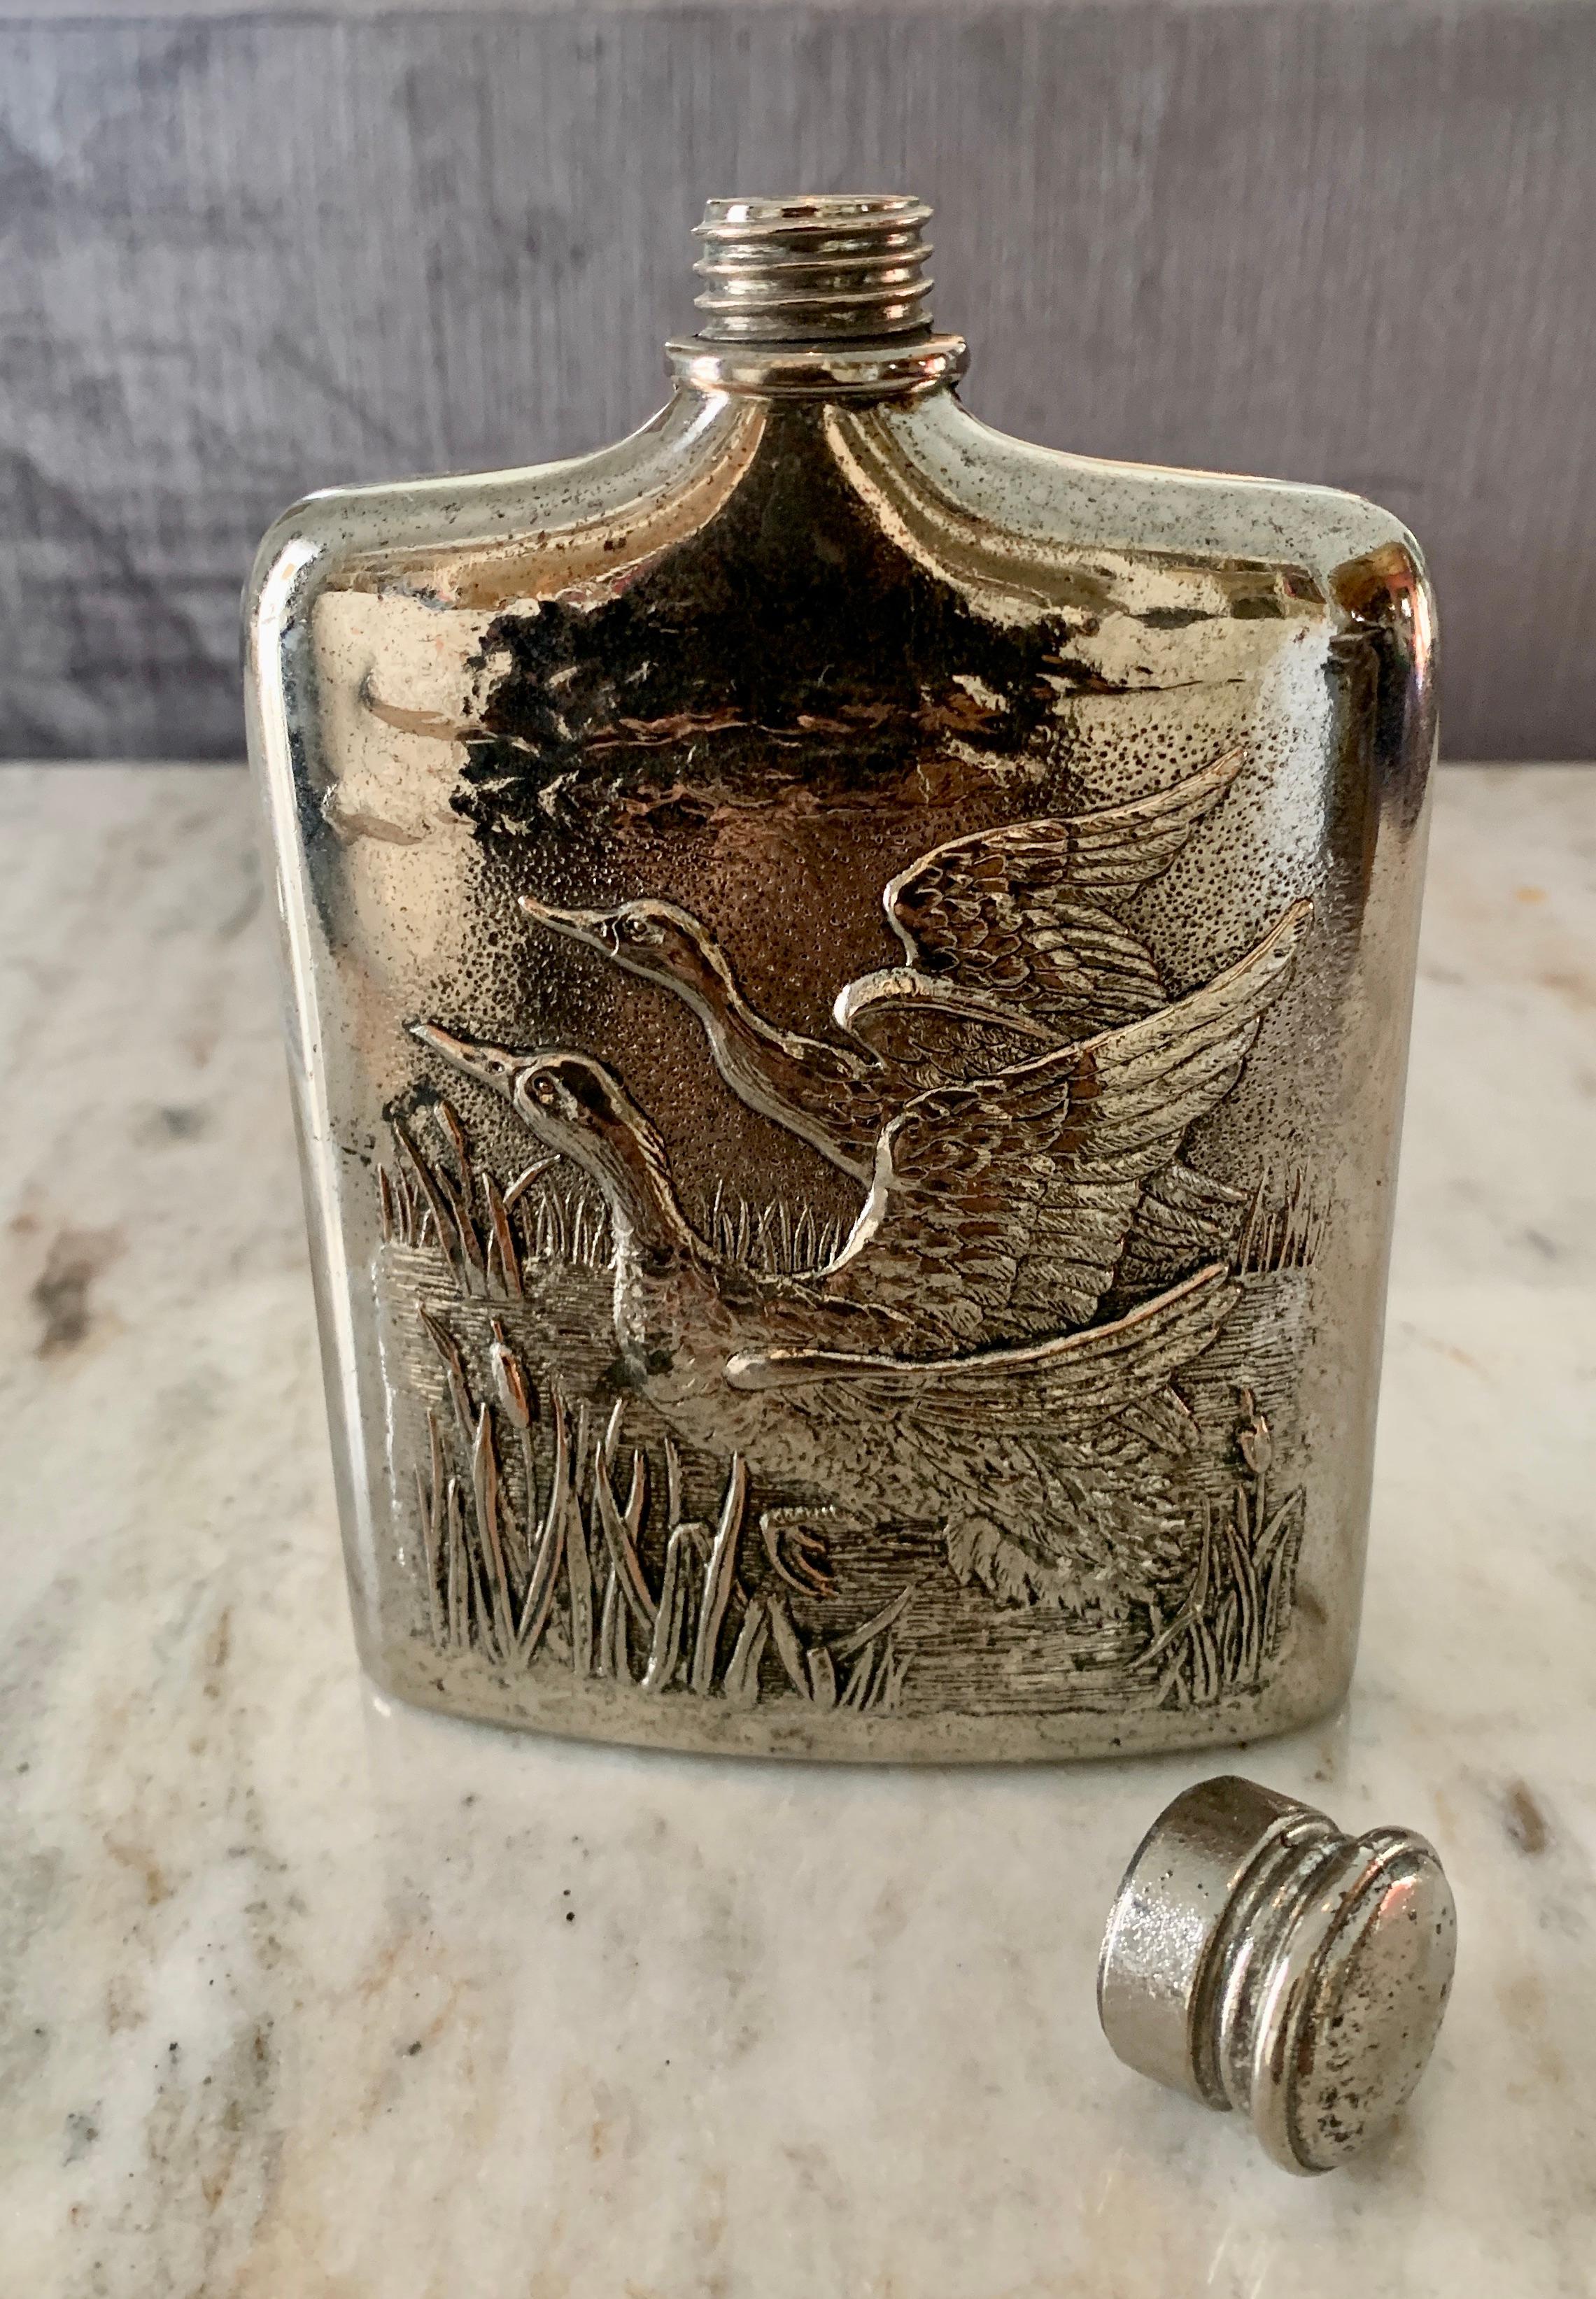 Godinger Flask with Reposse Geese and screw on Cap. The flask has been newly polished and is dated 1985. A wonderful decorative piece for the den or library, or for practical use